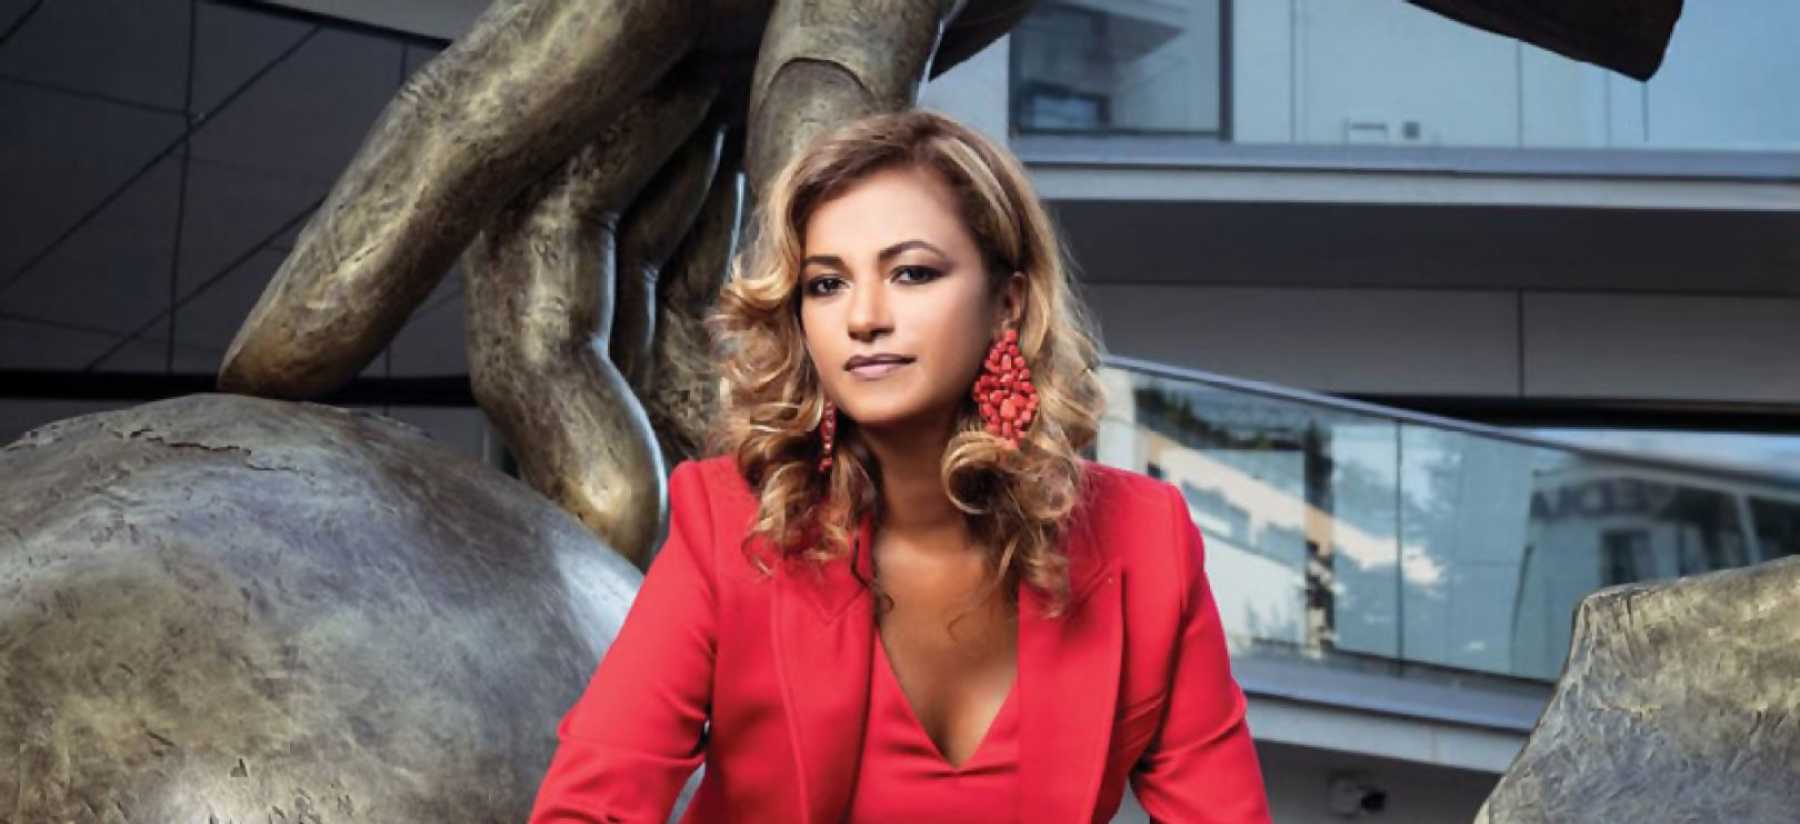 Beatrice Dumitrașcu, CEO Residential Division One United Properties, for wall-street.ro